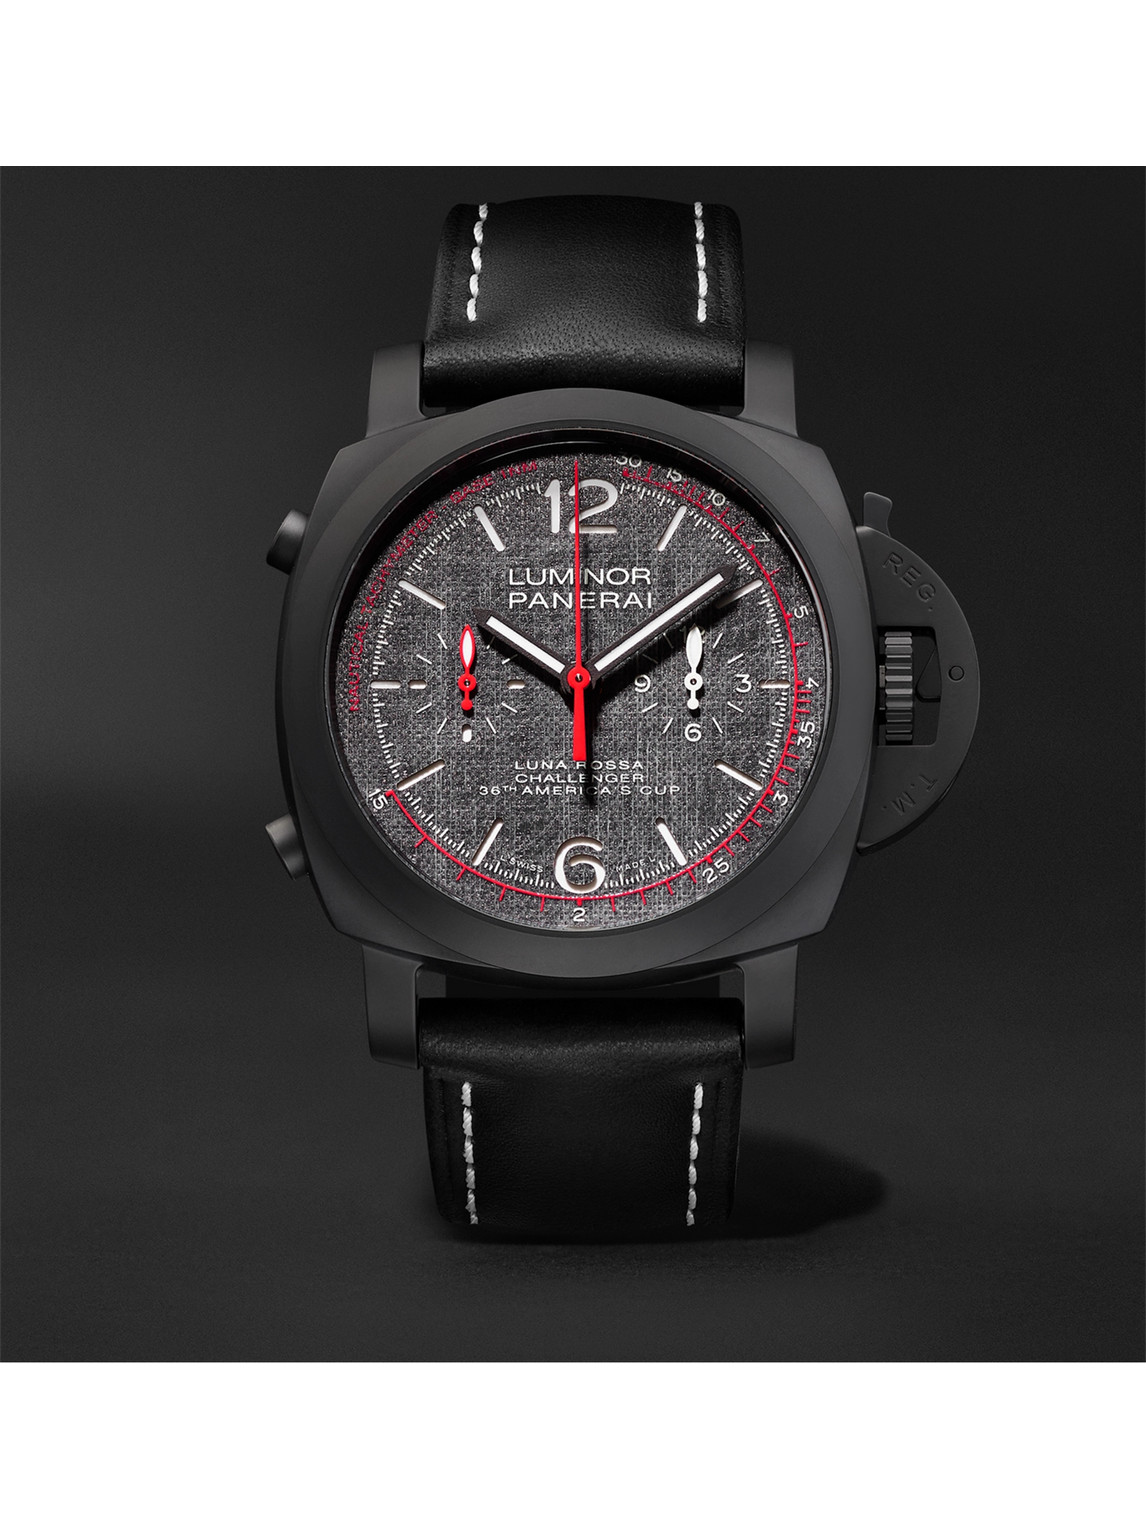 Luminor Luna Rossa Automatic Flyback Chronograph 44mm Ceramic and Leather Watch, Ref. No. PAM01037